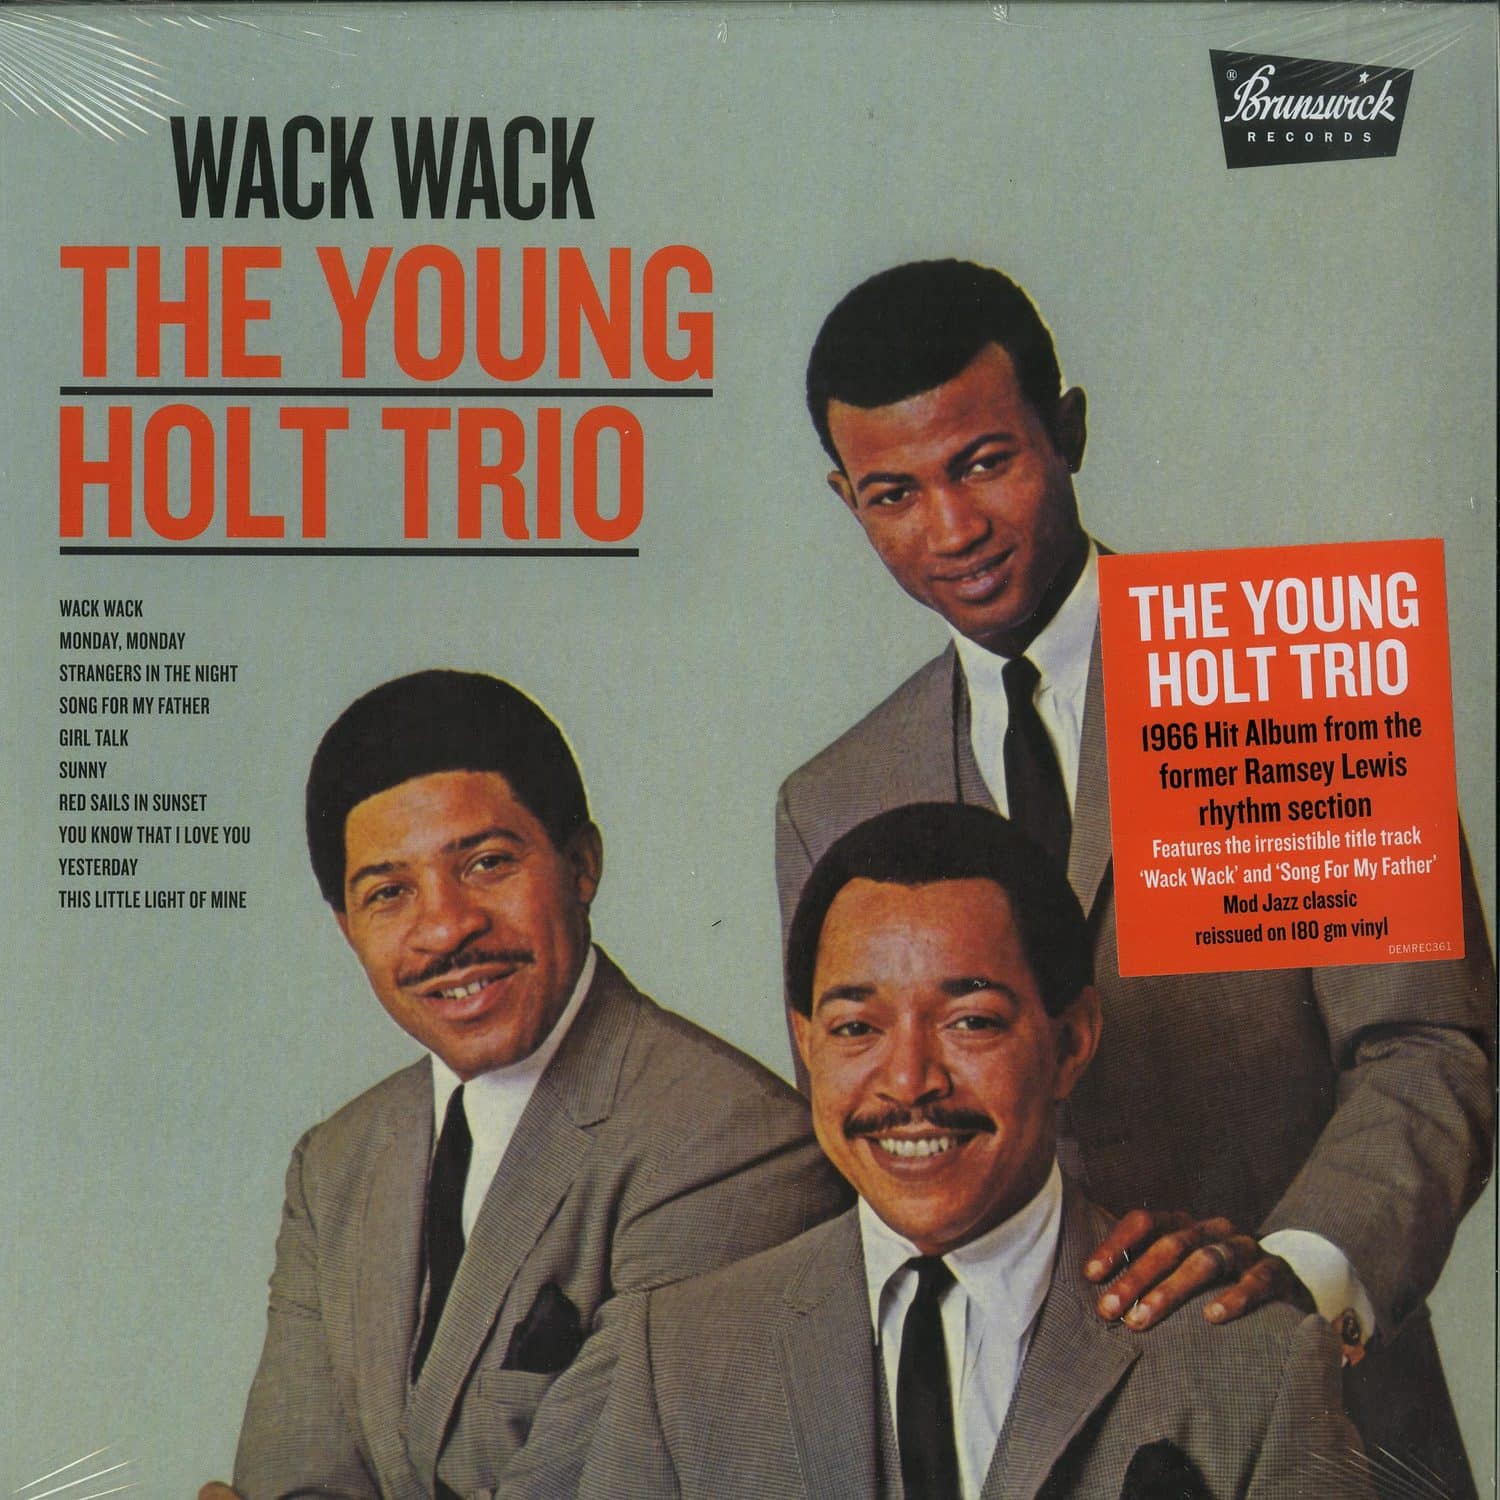 The Young Holt Trio - WACK WACK 